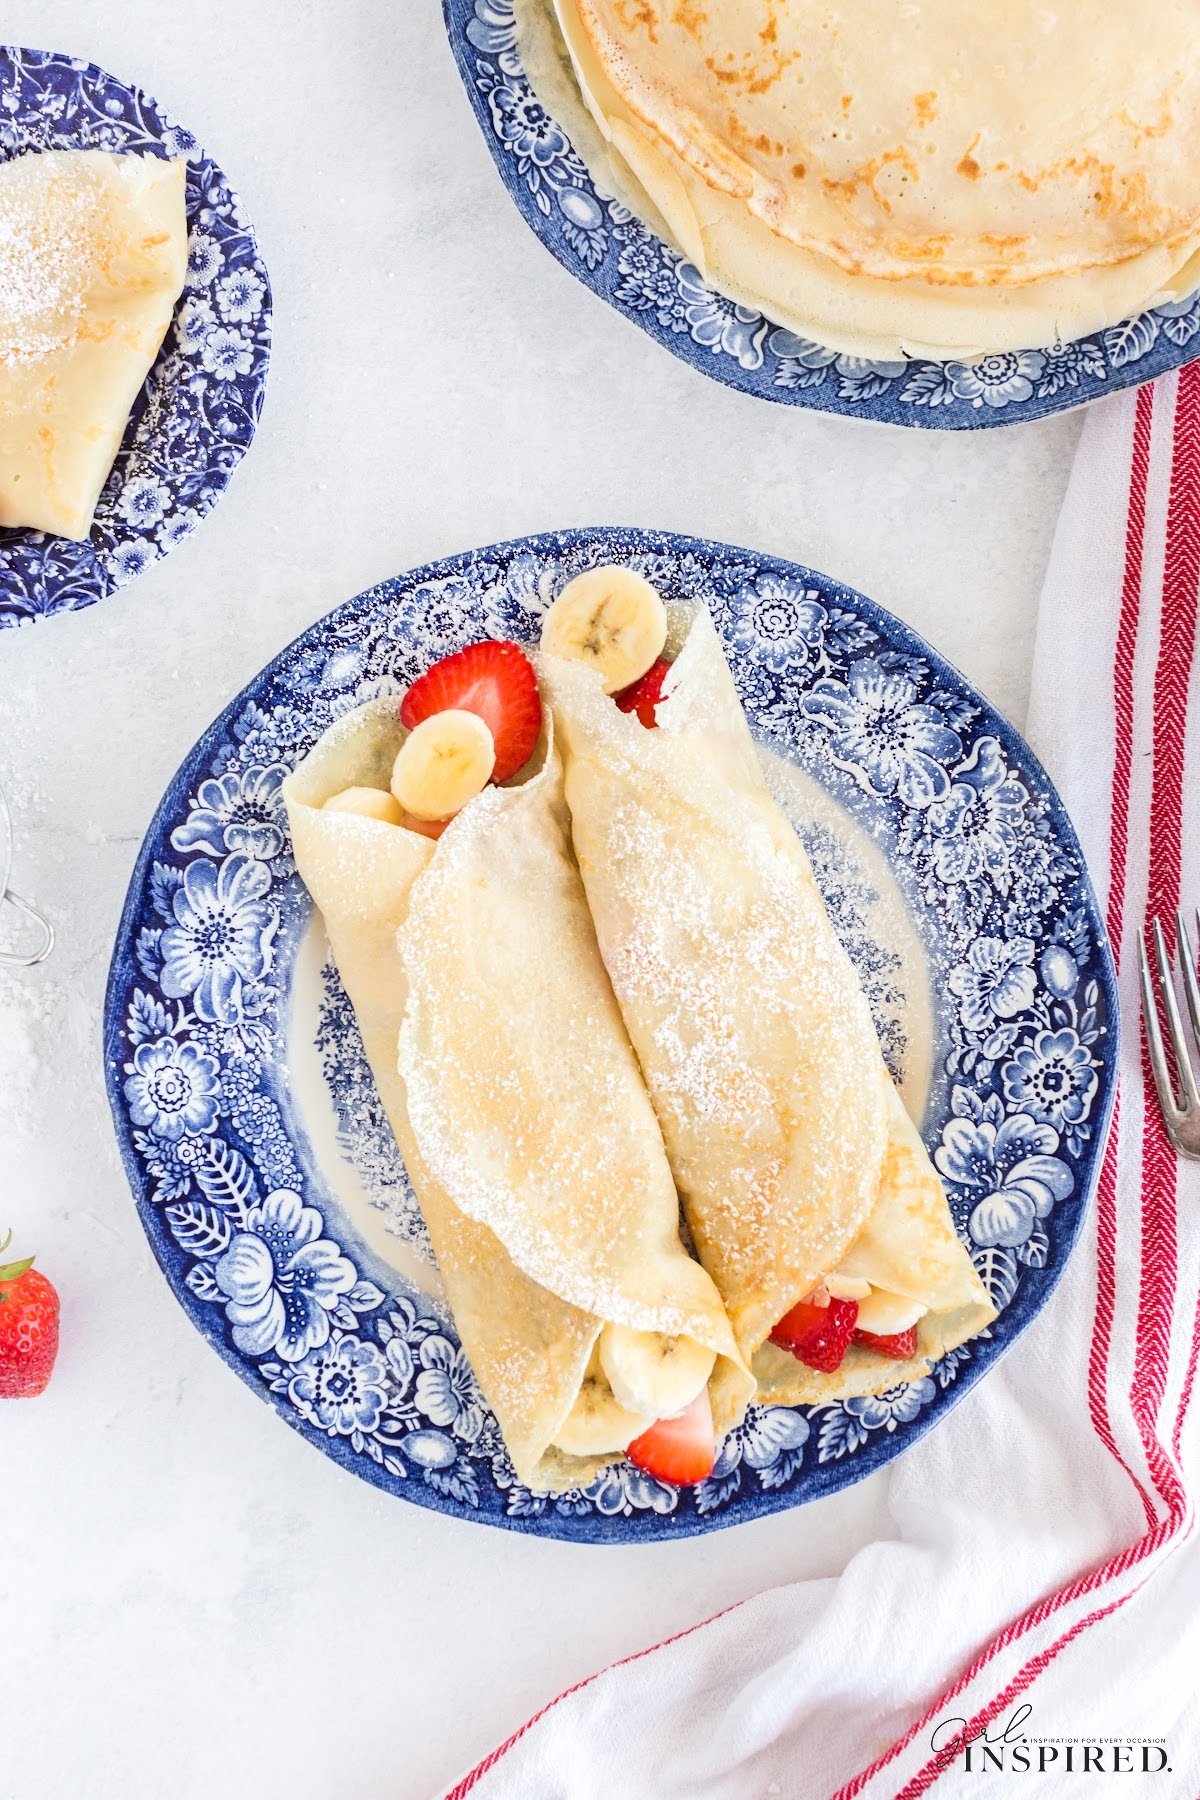 Two stuffed breakfast crepes on a blue floral plate.